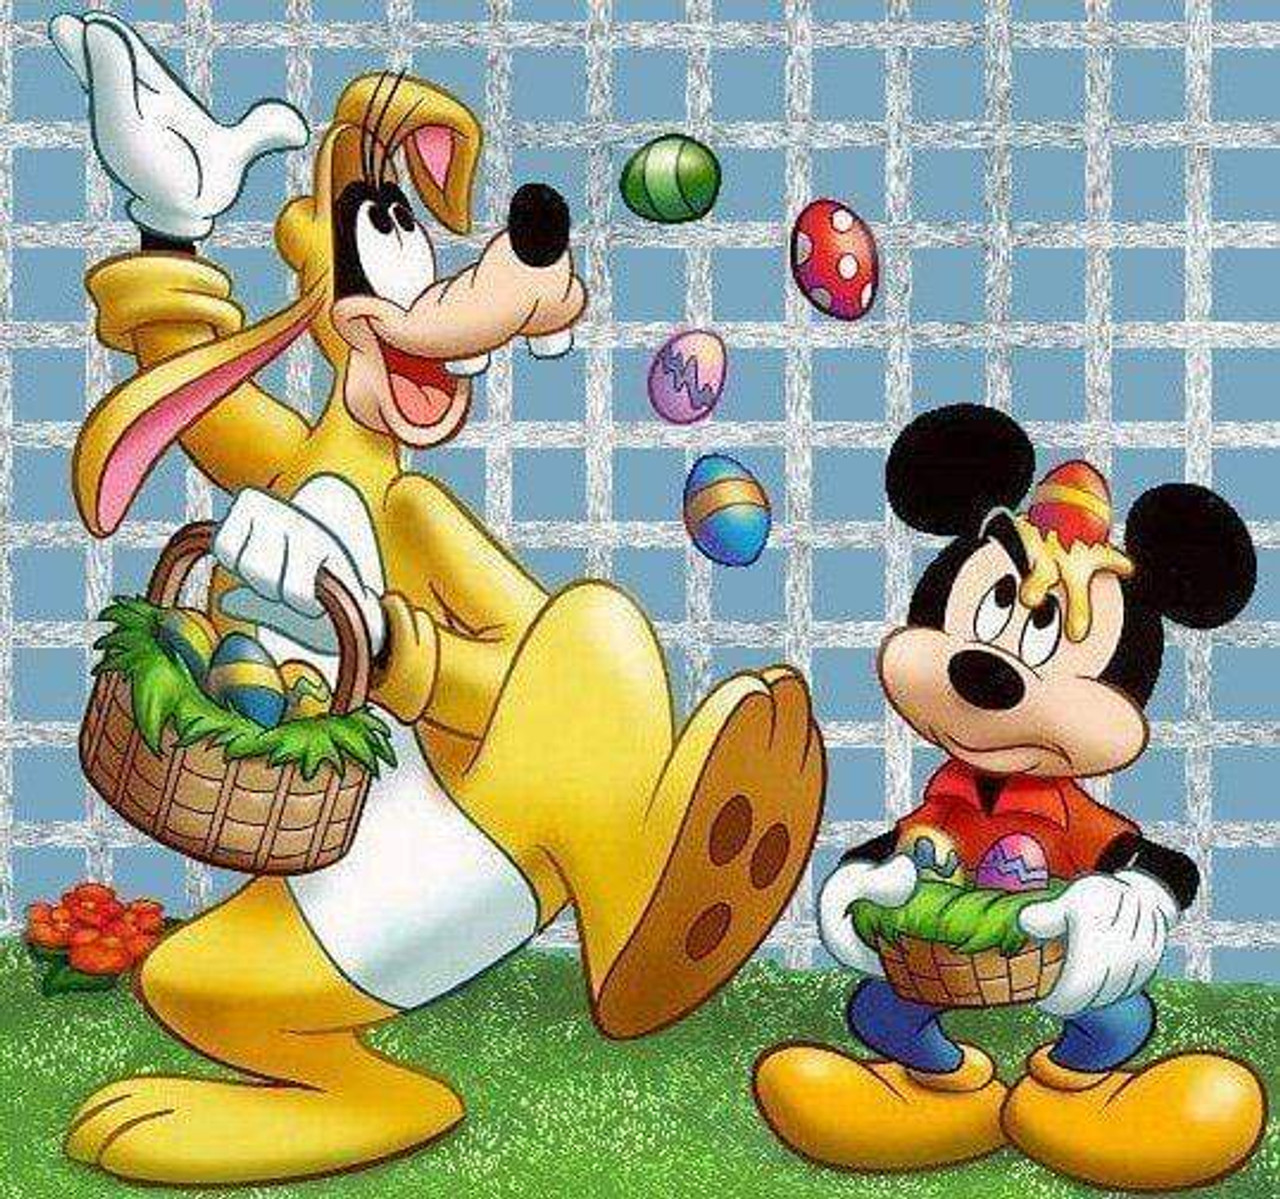 Rabbit with A Basket Easter Eggs Diamond Painting Kits 20% Off